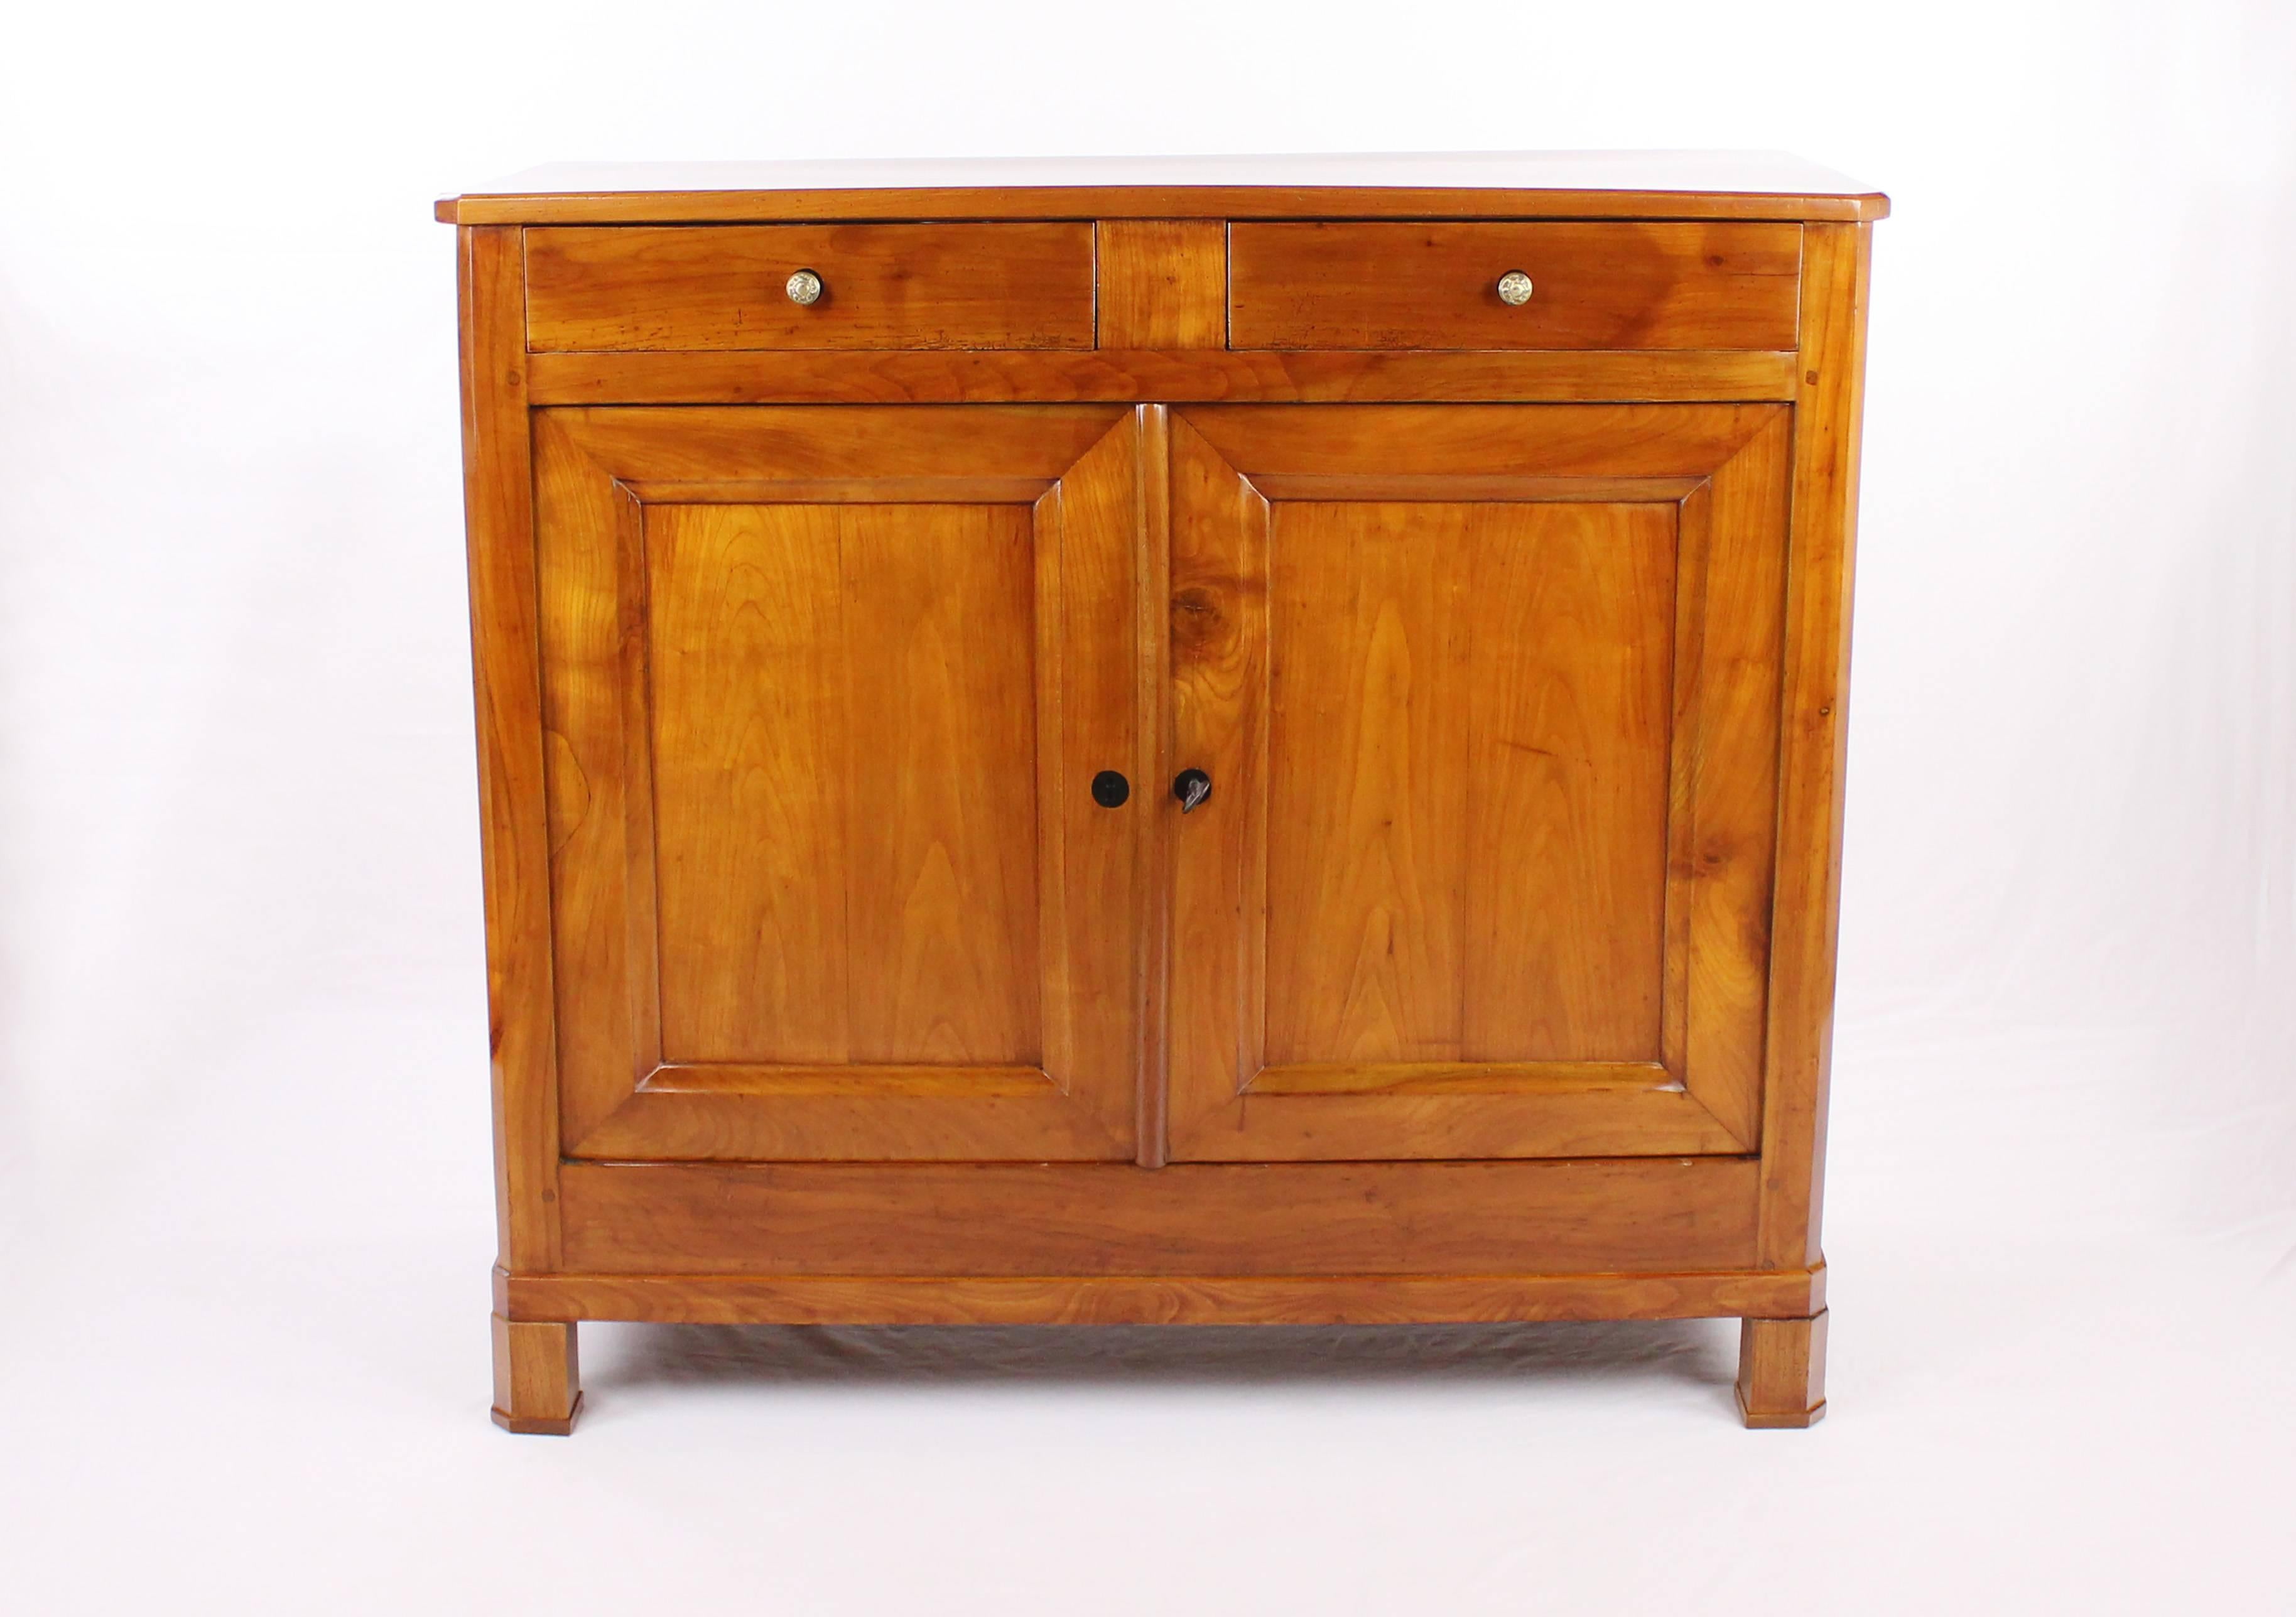 Chest of drawers
Cherry tree
Late Biedermeier, second half of the 19th century
Two pushes, two double doors
Restored residential-ready state
French shellac hand polish
Measures: Height 101 cm, width 111 cm, depth 47 cm.

Delivery can be made